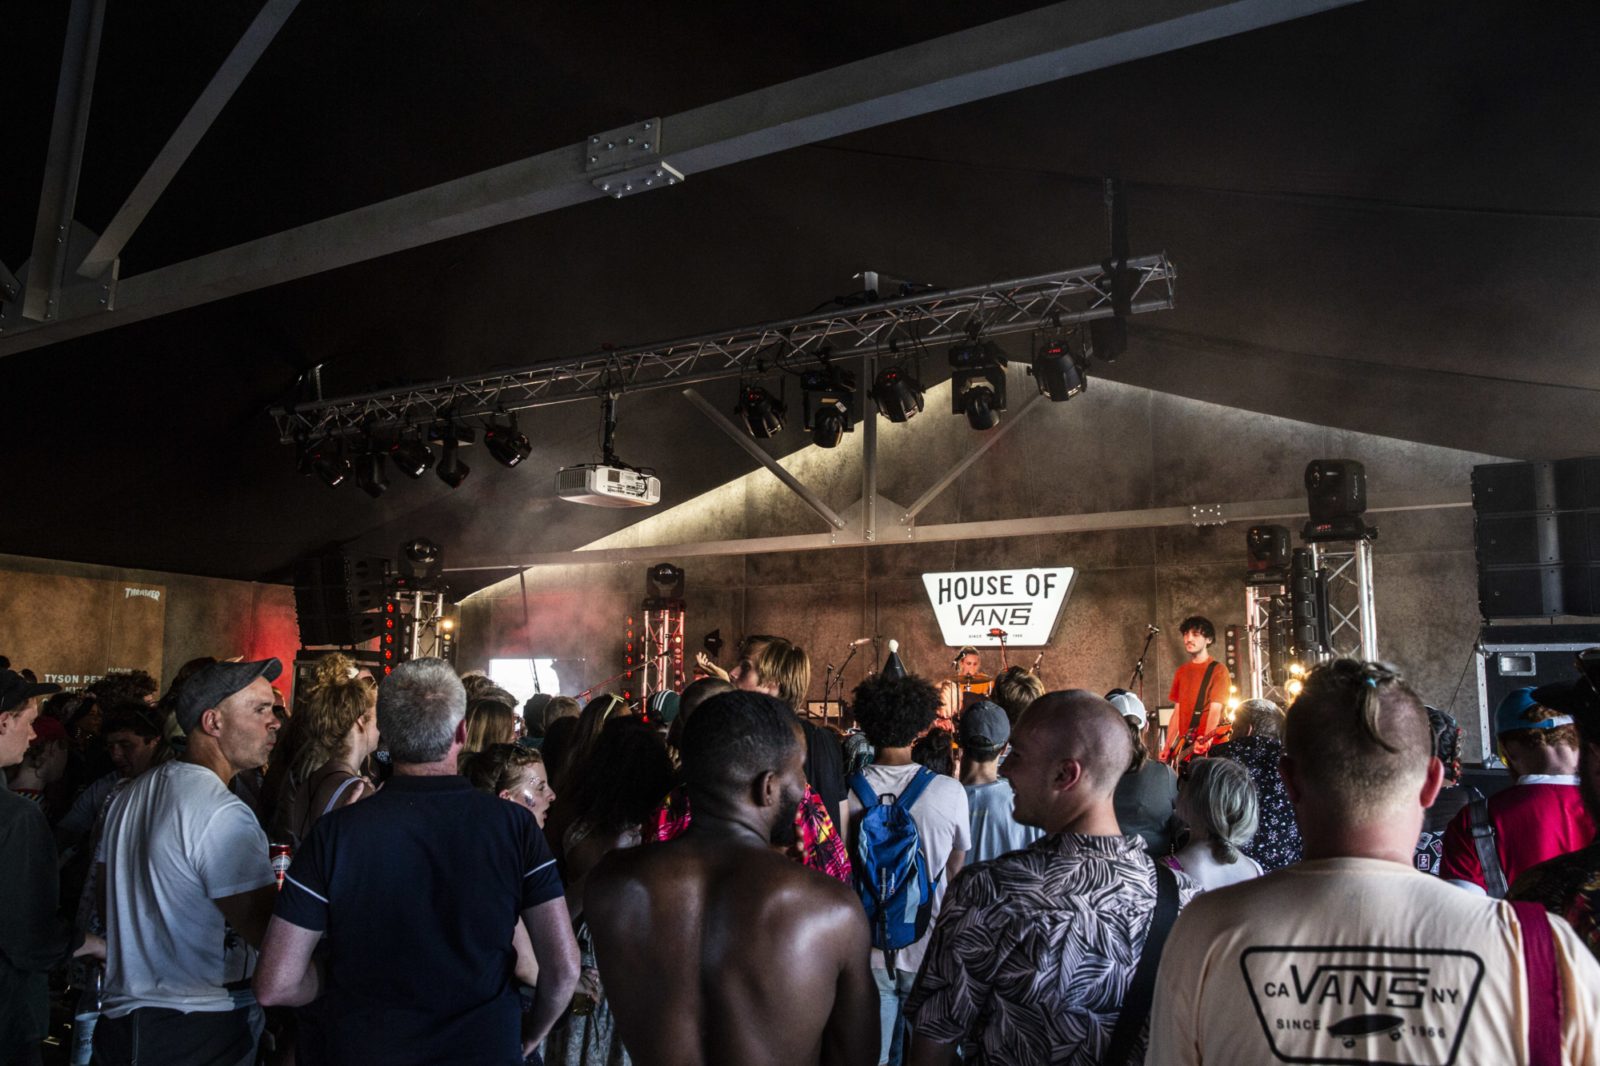 Chaka Khan, Songhoy Blues and a packed line-up on DIY’s House Of Vans stage bring Bestival 2018 to a stunning close